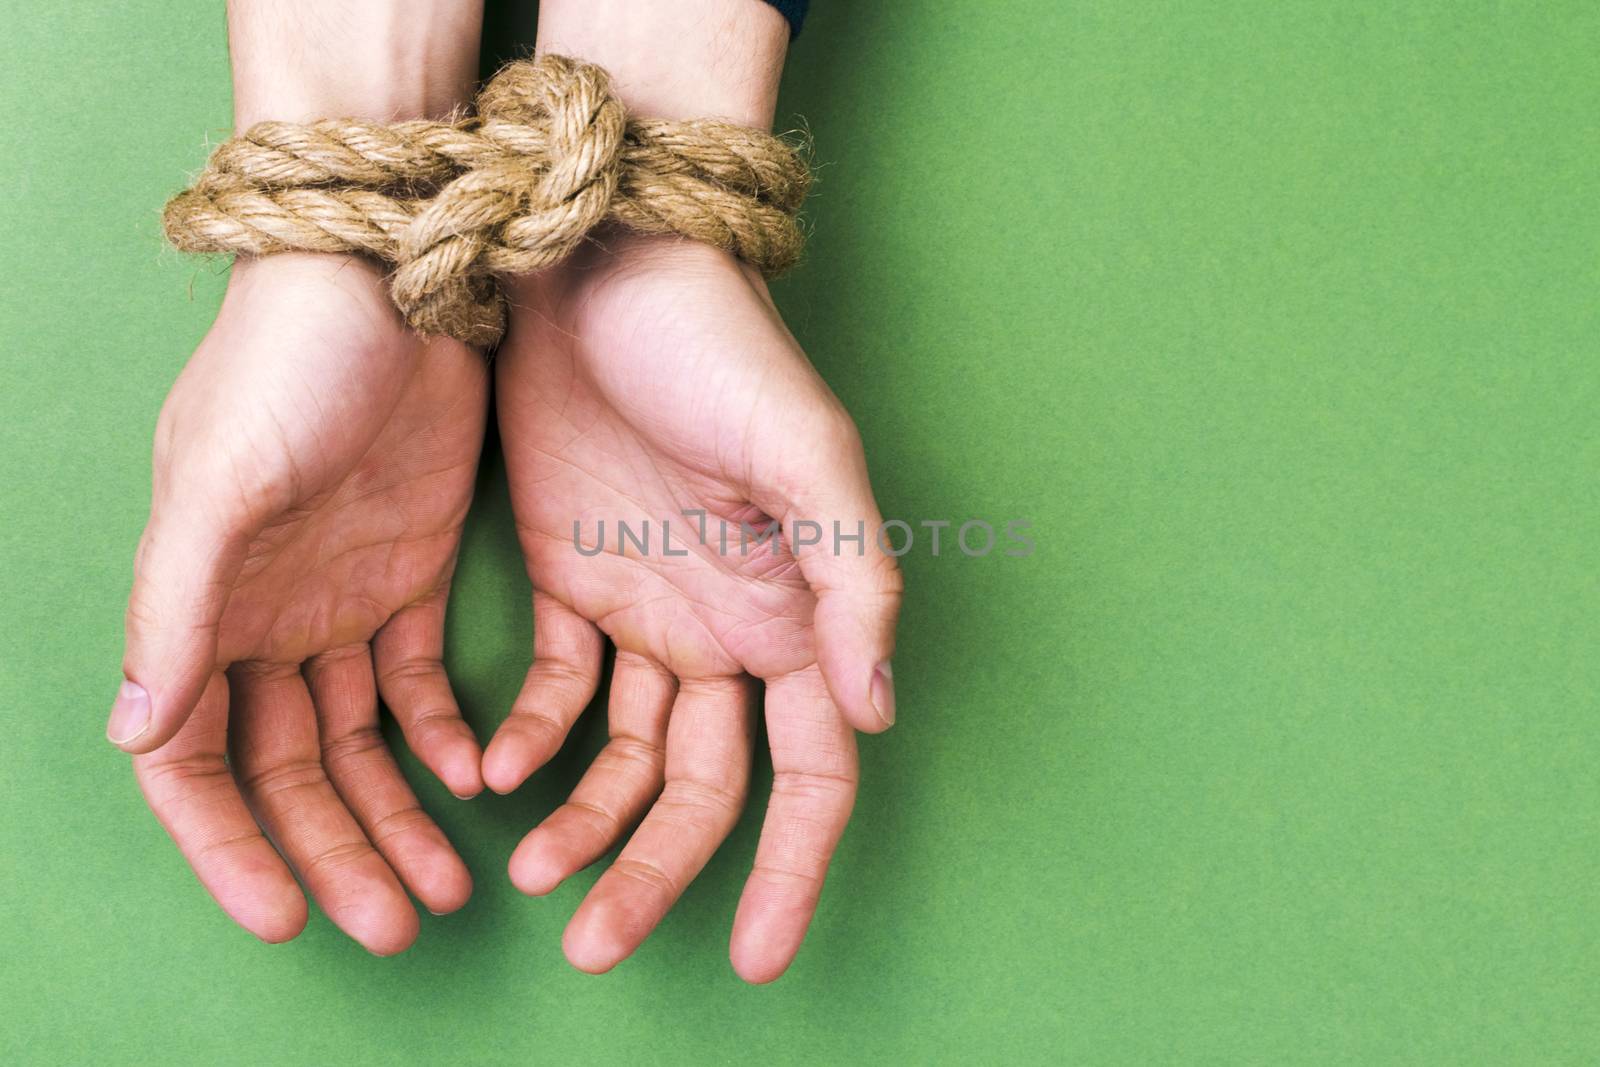 The man with the connected hands against a green background